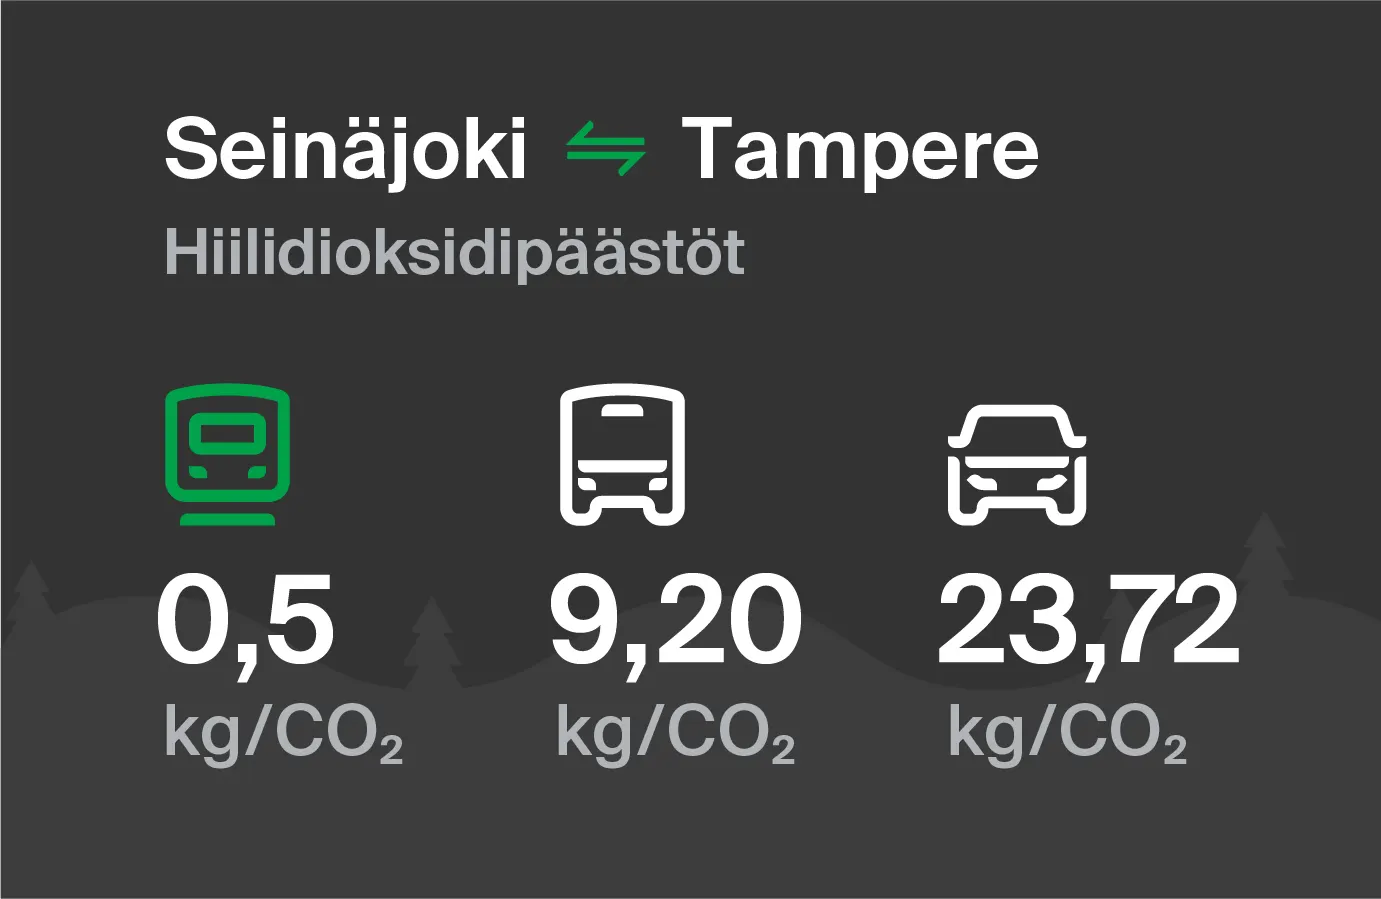 Carbon dioxide emissions from Seinäjoki to Tampere by different modes of transport: by train 0.5 kg/CO2, by bus 9.20 kg/CO2 and by car 23.72 kg/CO2.